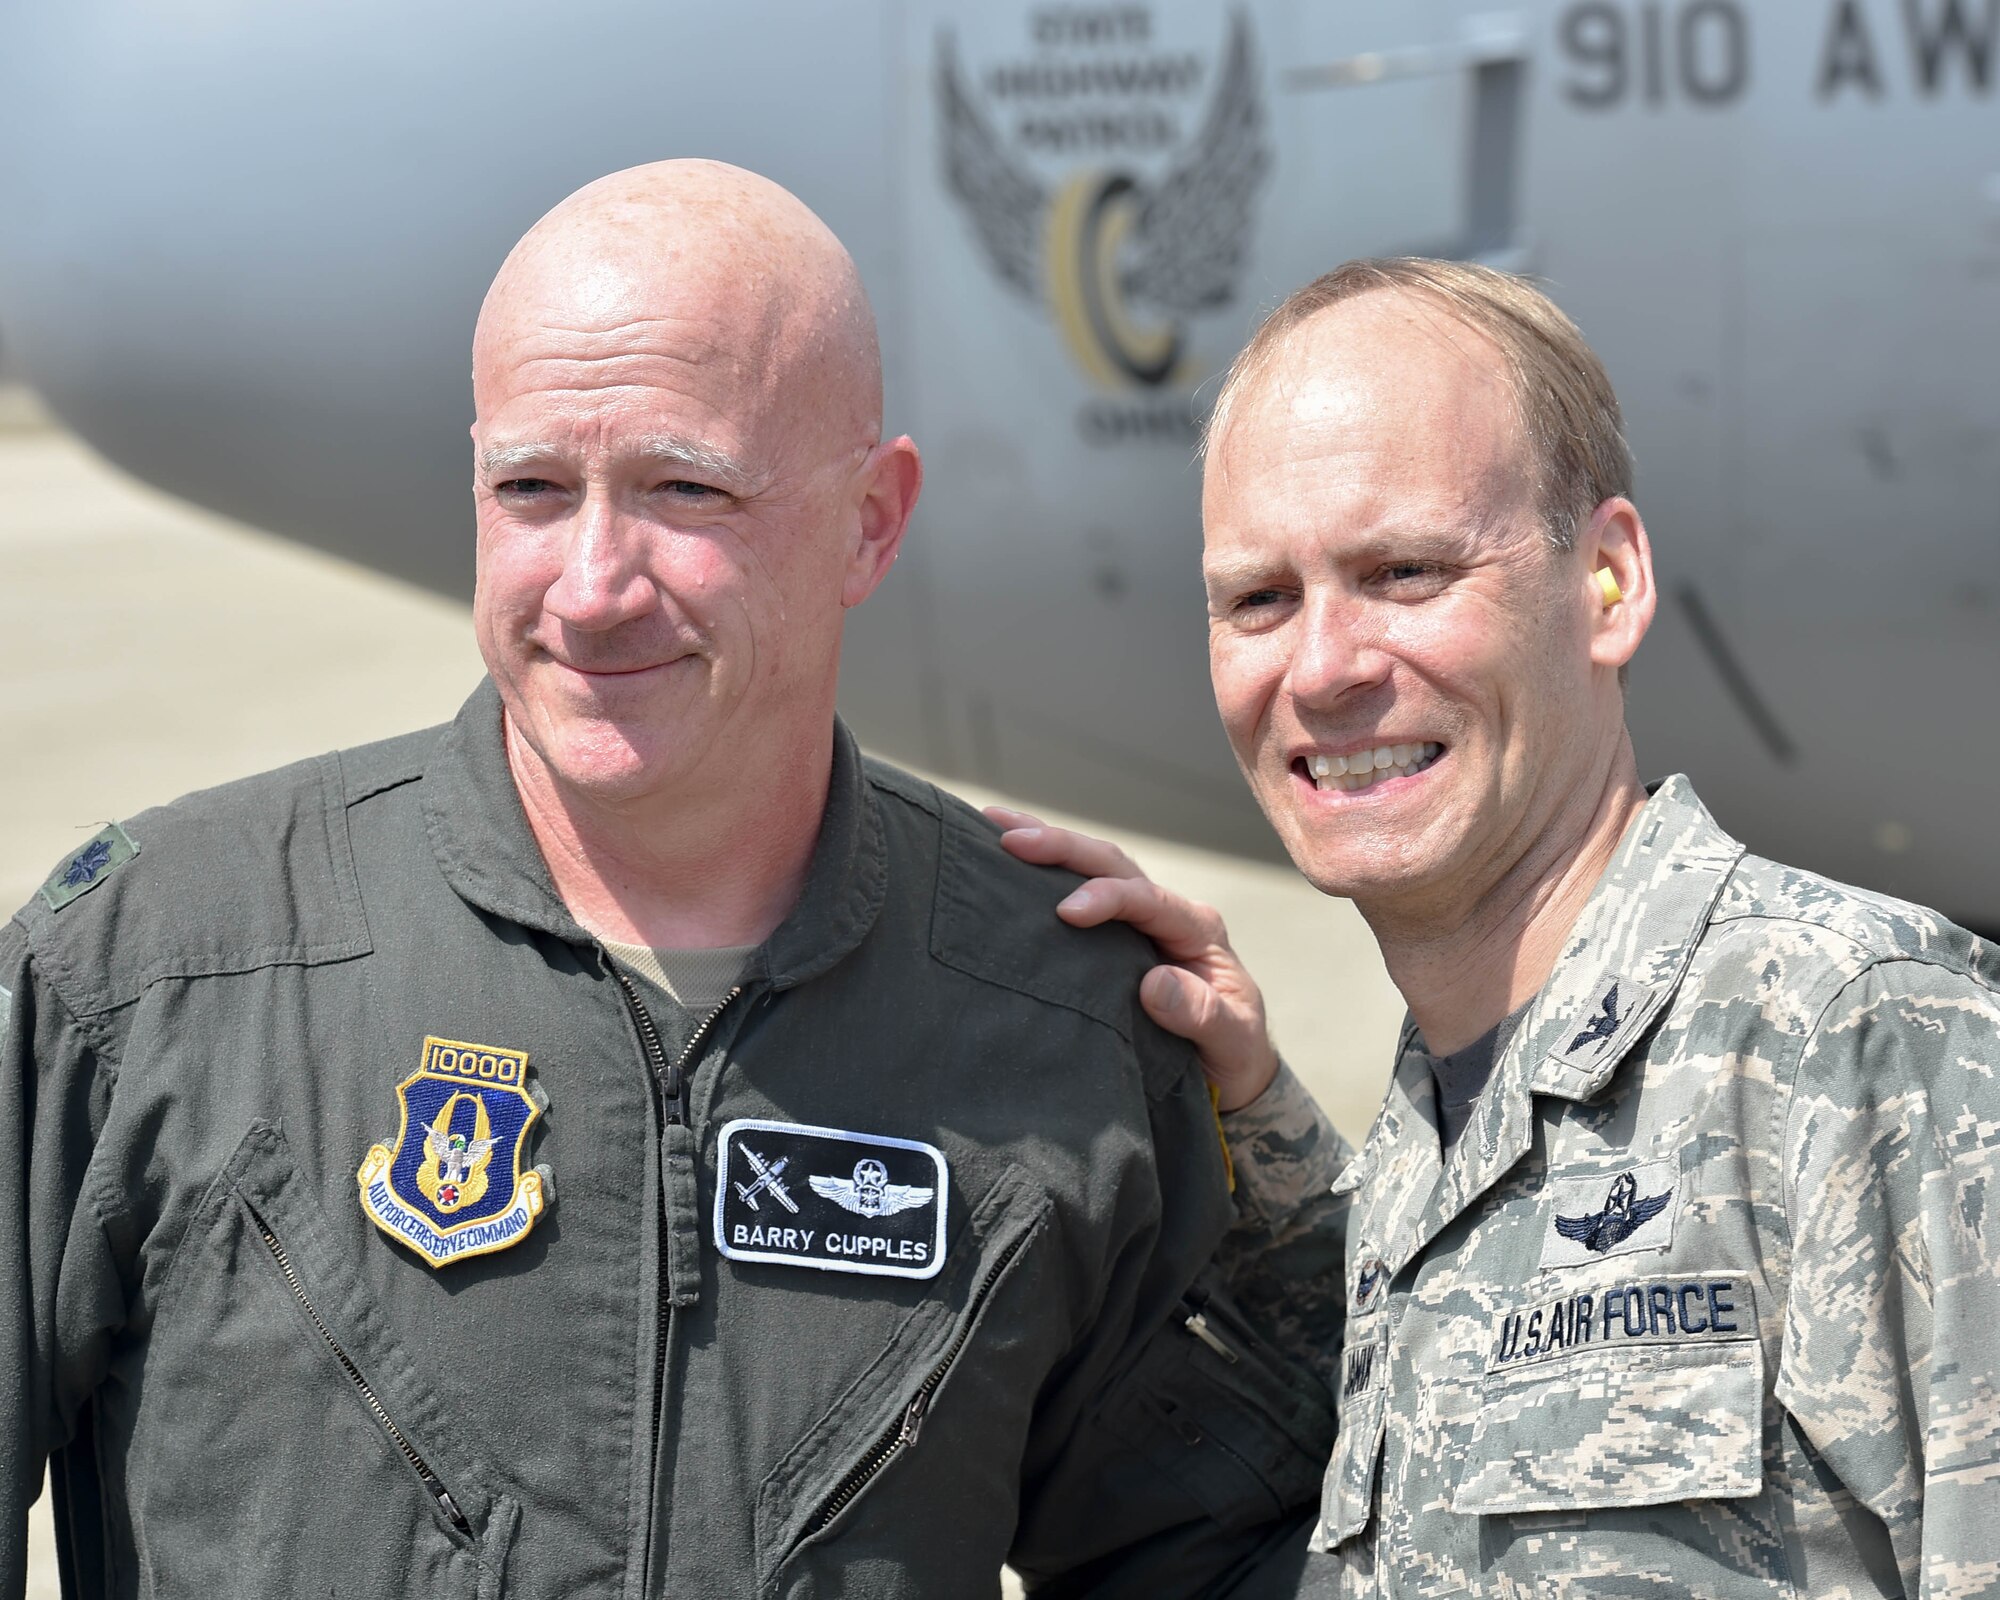 Lt. Col. Barry “JR” Cupples, a navigator assigned to the 757th Airlift Squadron here, poses for a photo with 910th Airlift Wing Commander Col. Joe Janik after completing his ten thousandth C-130 flight hour here, April 6, 2019.